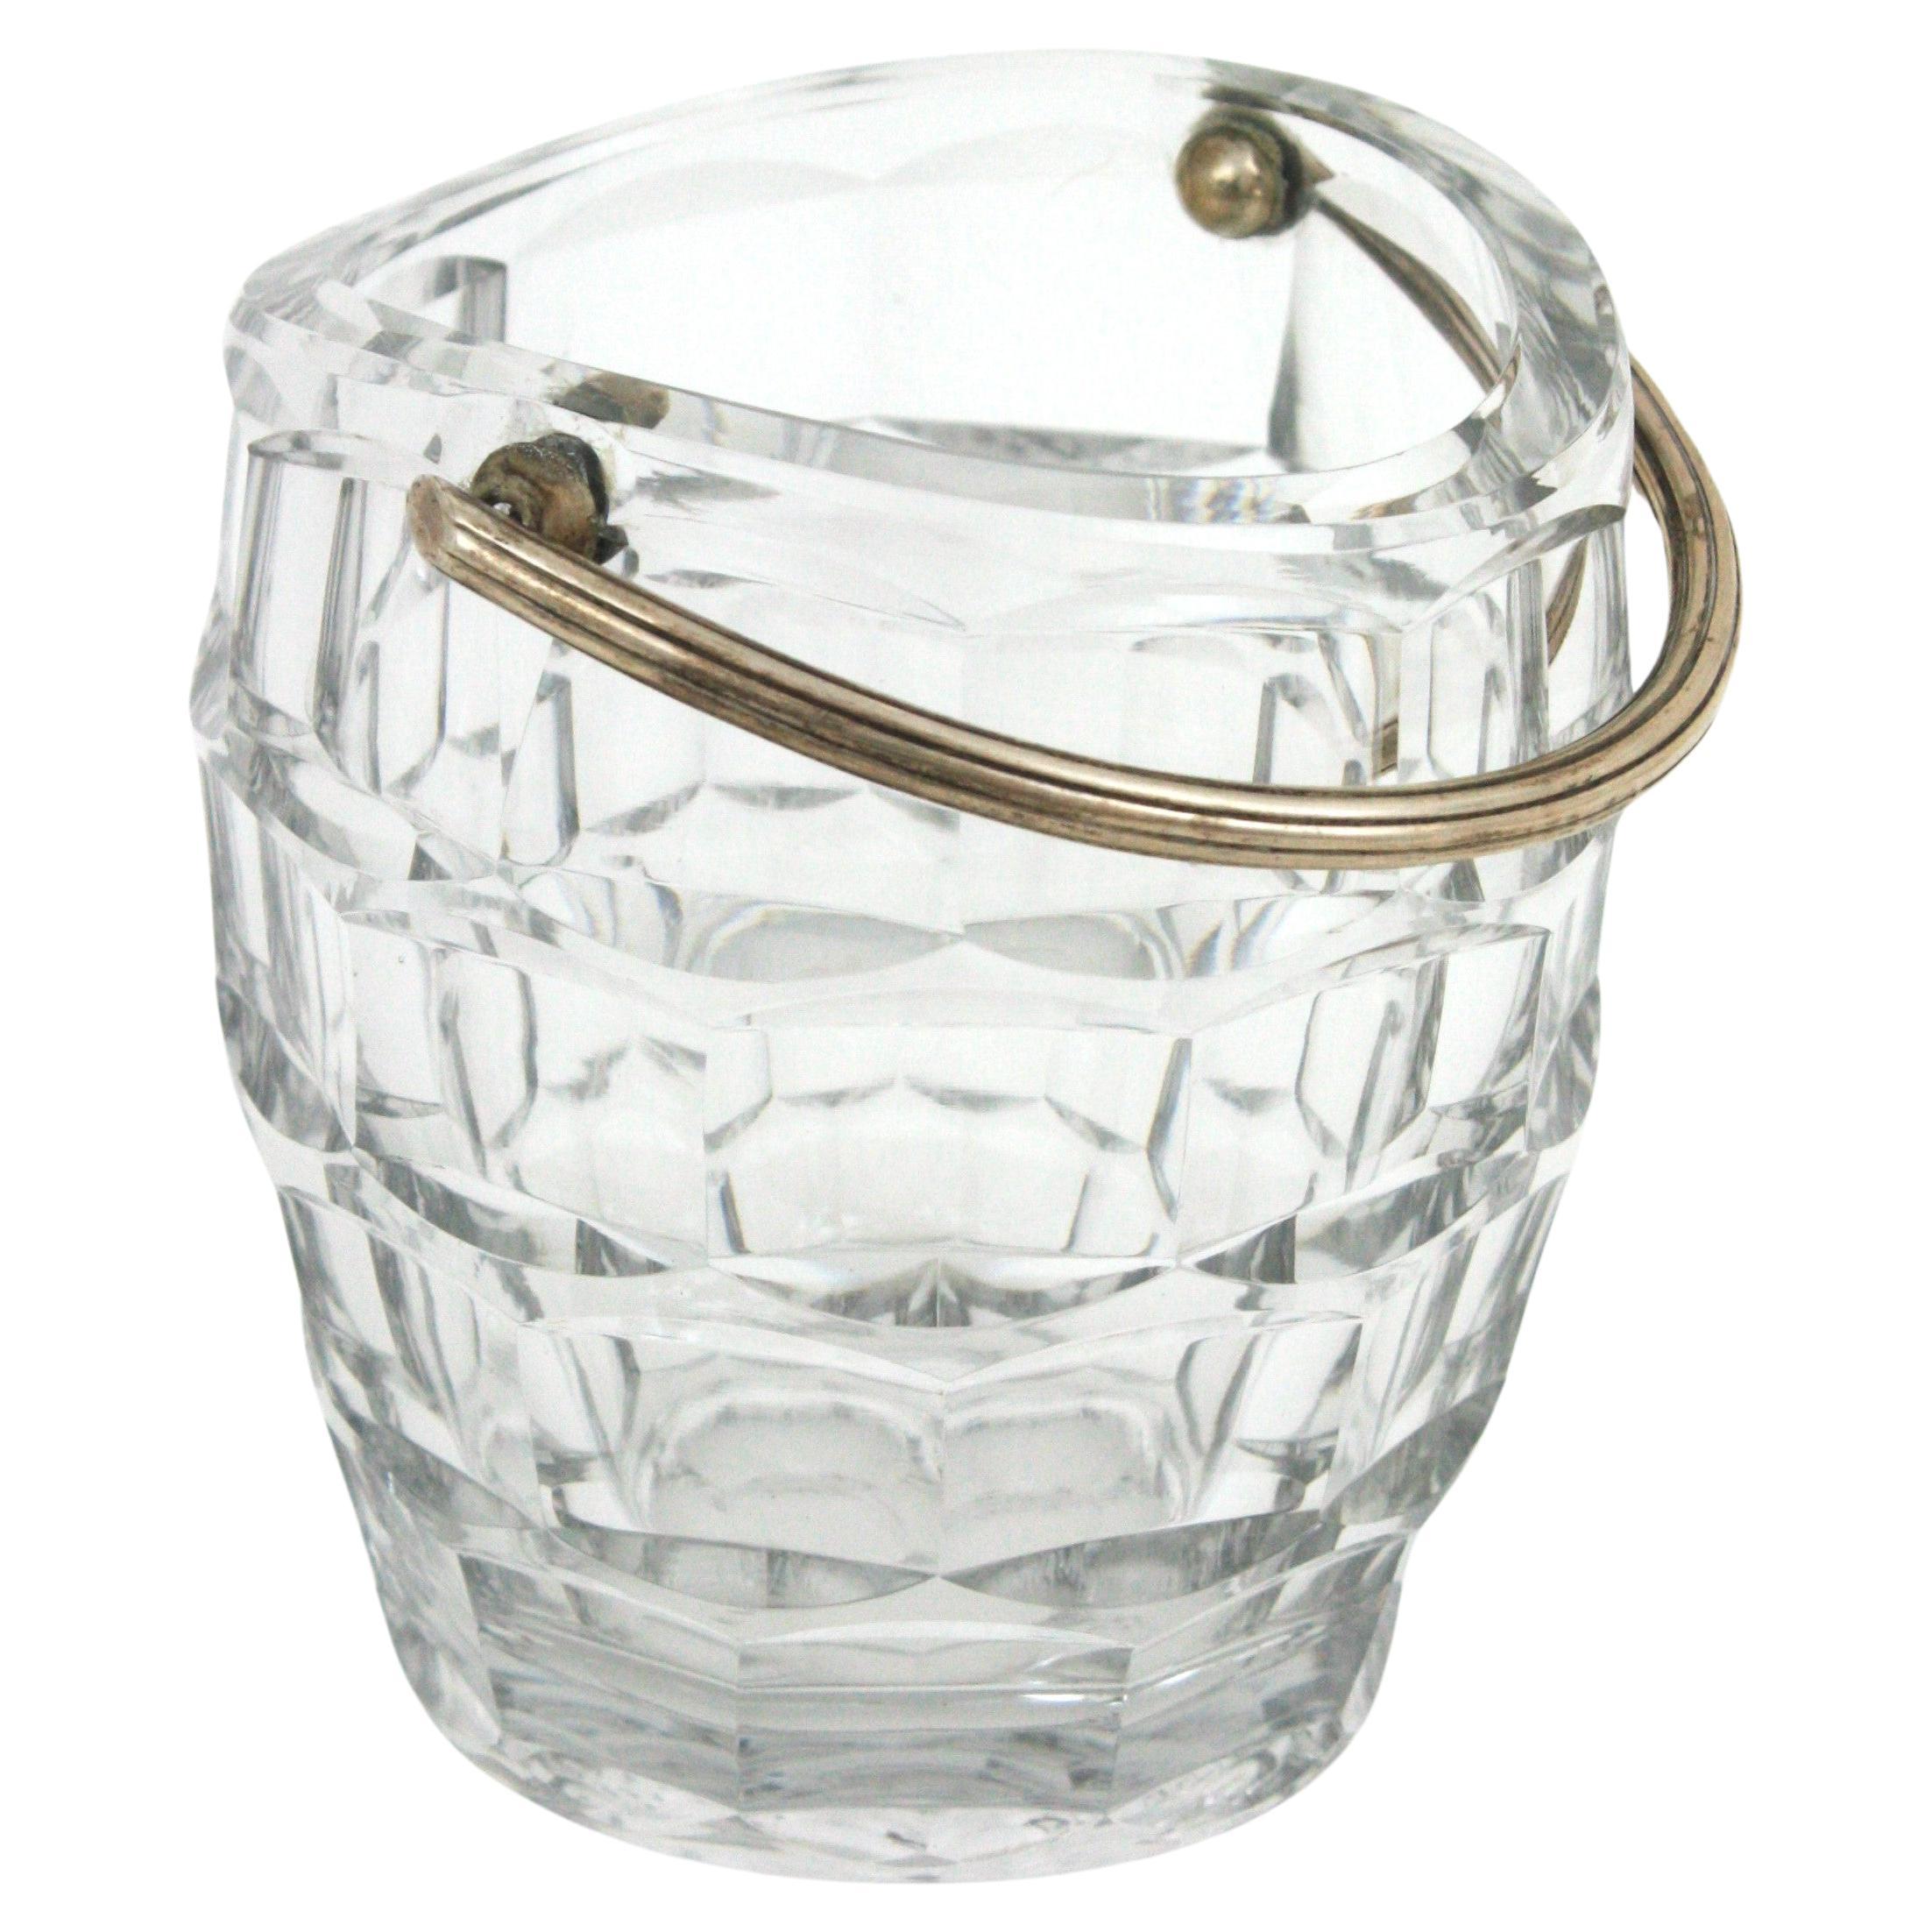 Midcentury Baccarat Cut Crystal and Silver Ice Bucket, 1950s For Sale